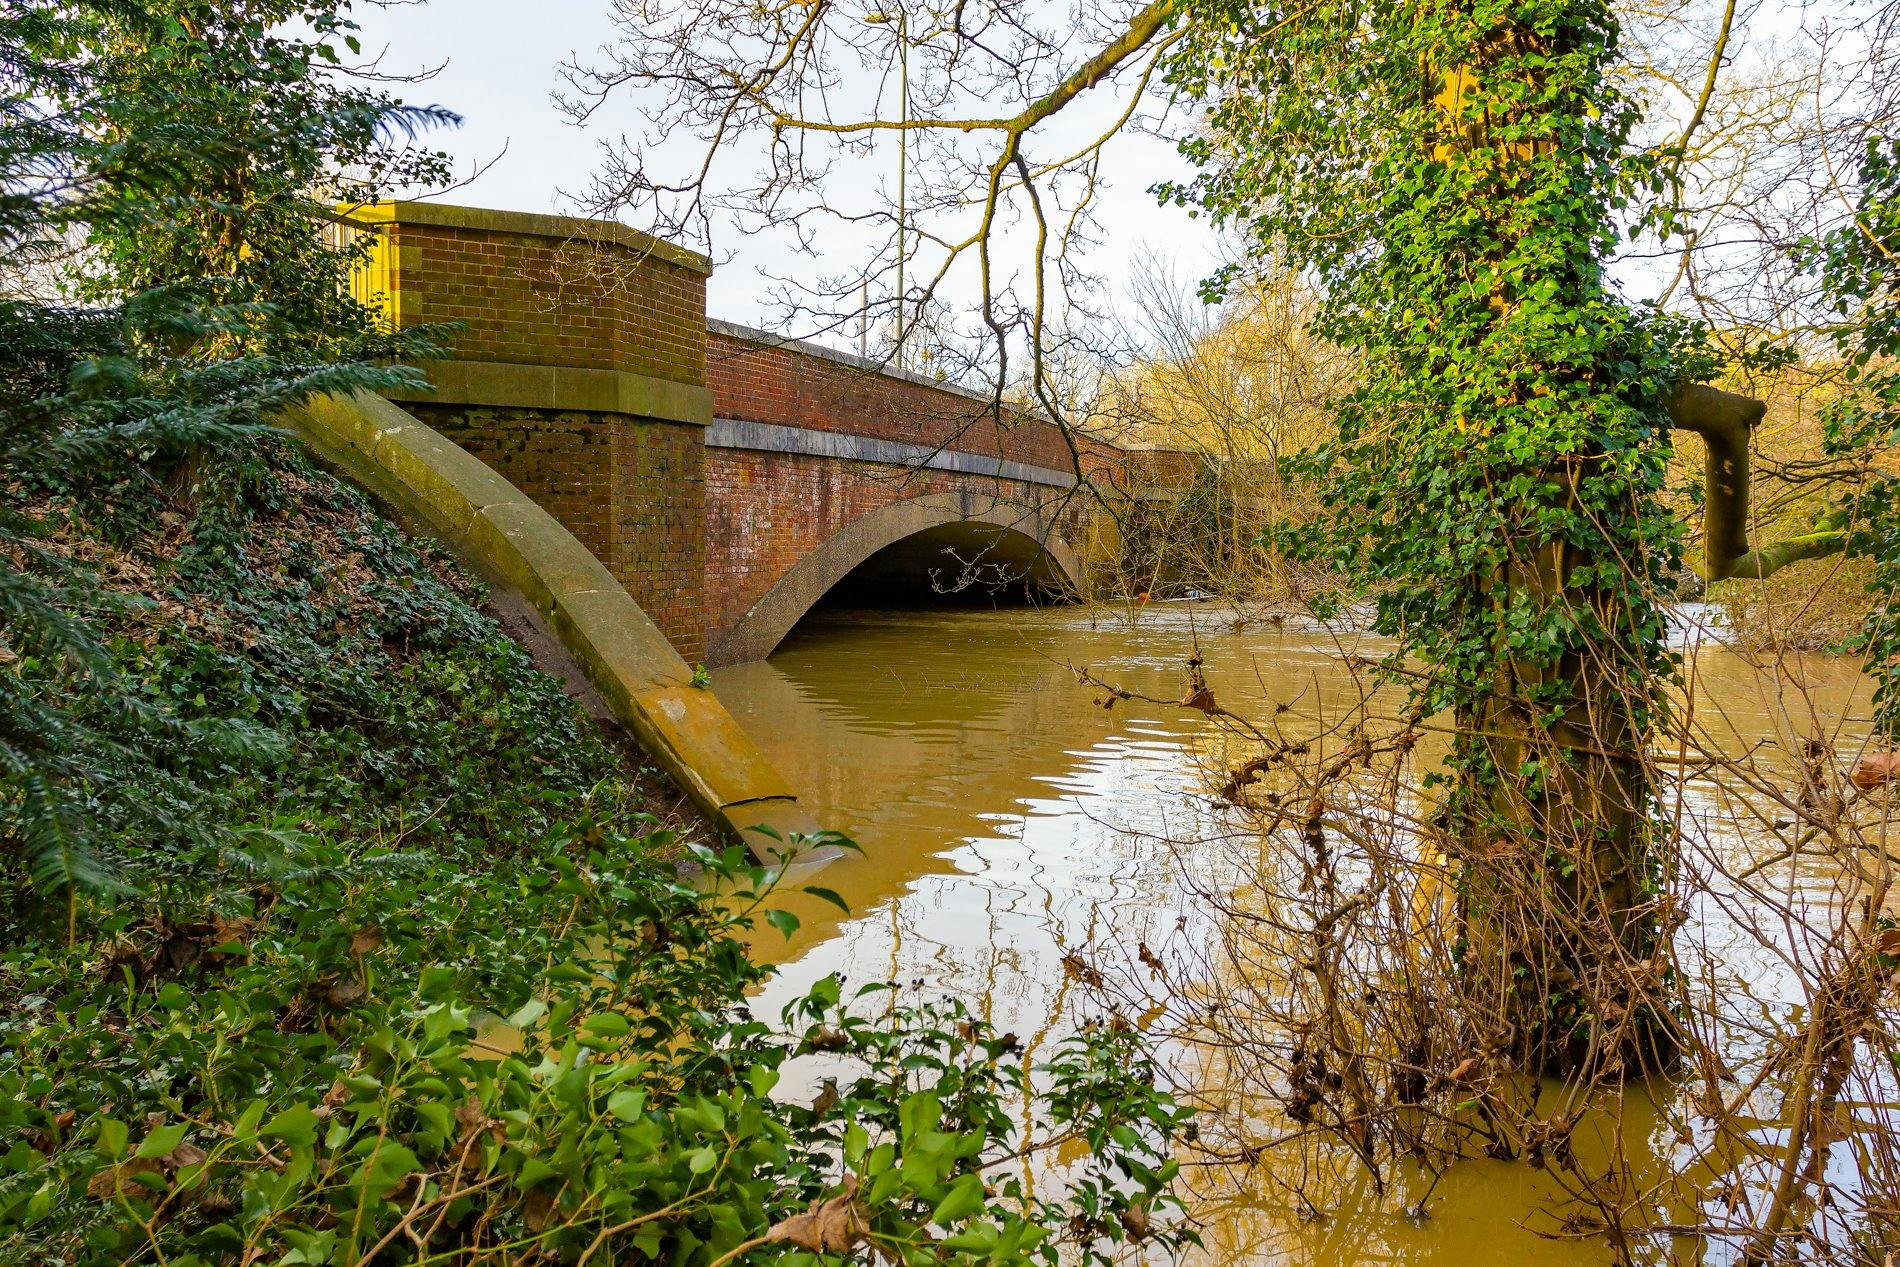 <p>There are four medieval bridges along the River Windrush, which is a tributary of the River Thames in central England. </p><p><br></p><p>These bridges are located in the towns of Bourton-on-the-Water, Windrush, Burford, and Newbridge. </p><p><br></p><p>They were built in the 15th century and later widened or restored. The bridges are part of the historic and scenic charm of the river and the surrounding villages.</p>